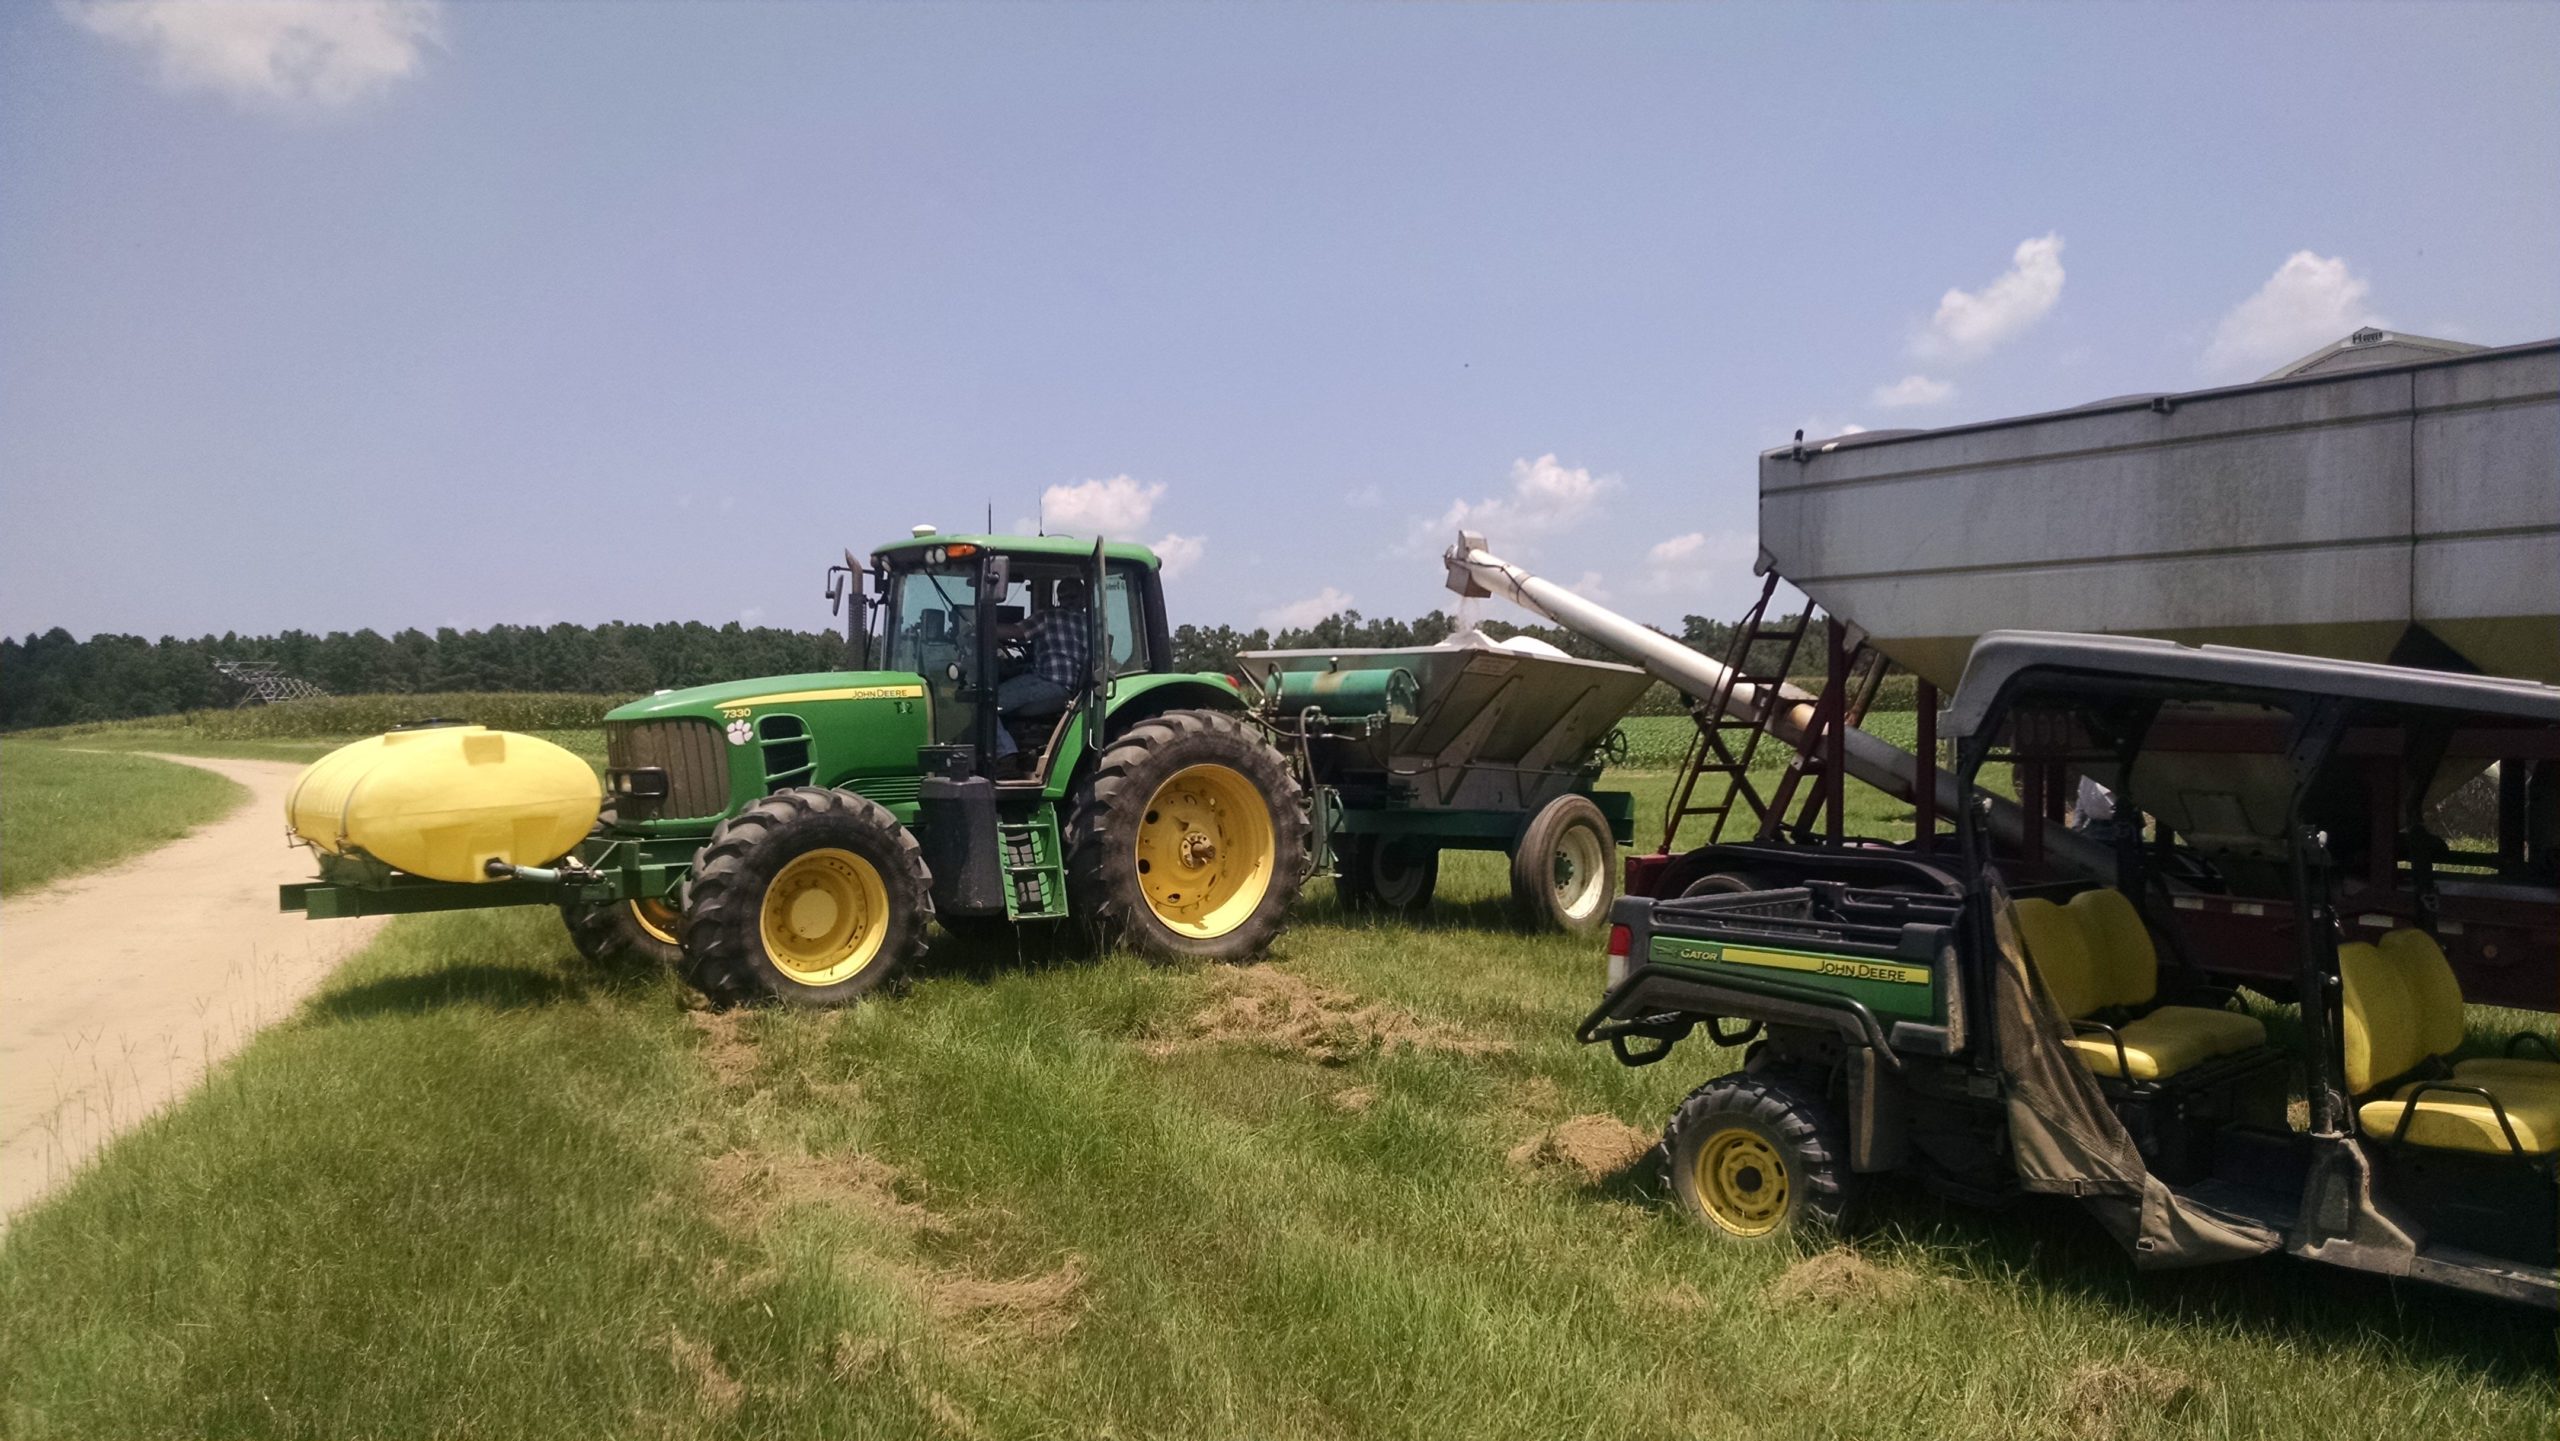 The Clemson University Cooperative Extension Service Precision Agriculture group has developed two new soil fertility calculators to help growers maximize their fertilizer dollars.